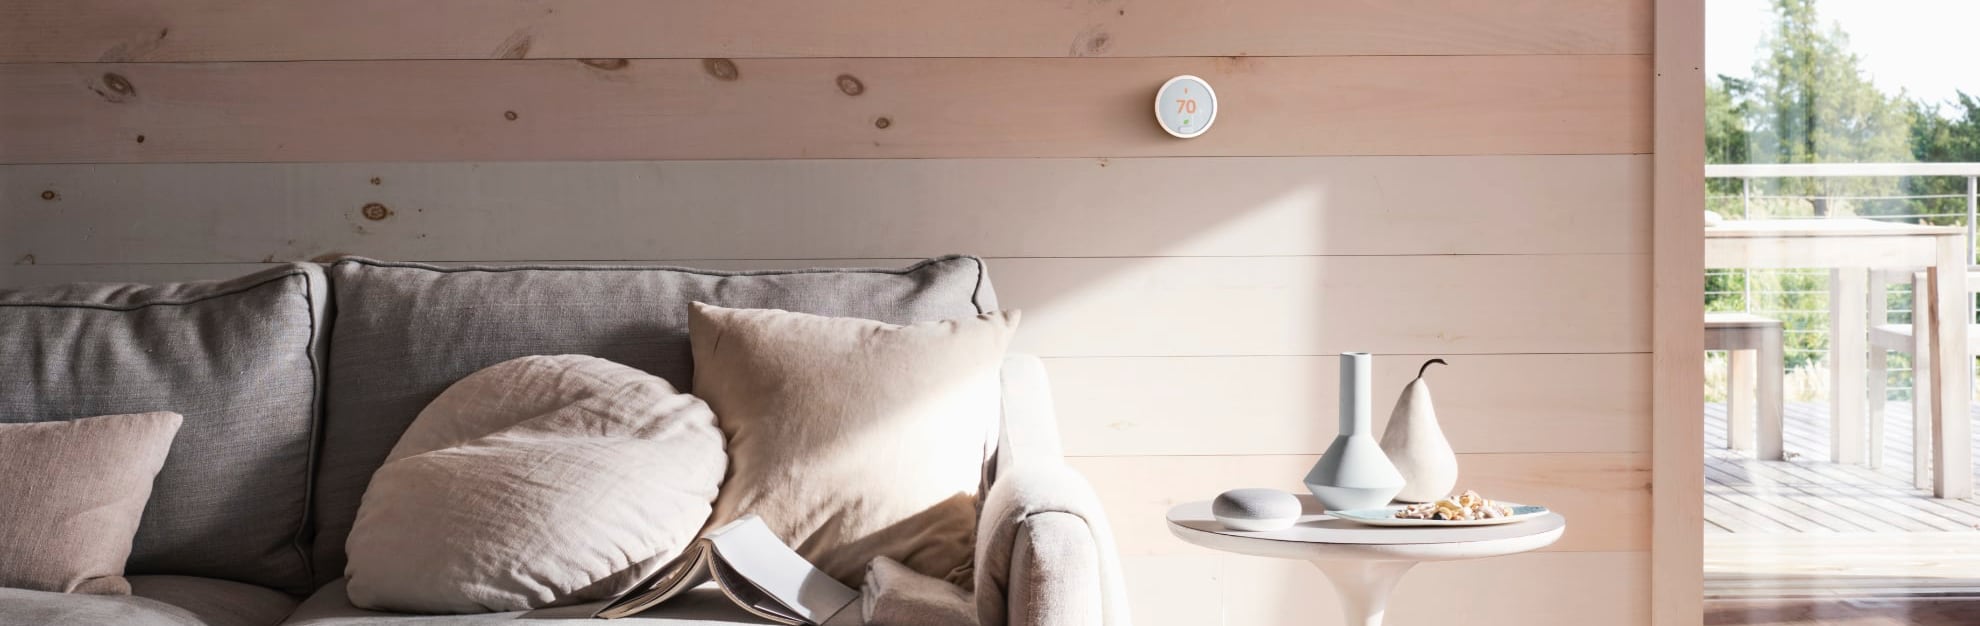 Vivint Home Automation in Sugarland